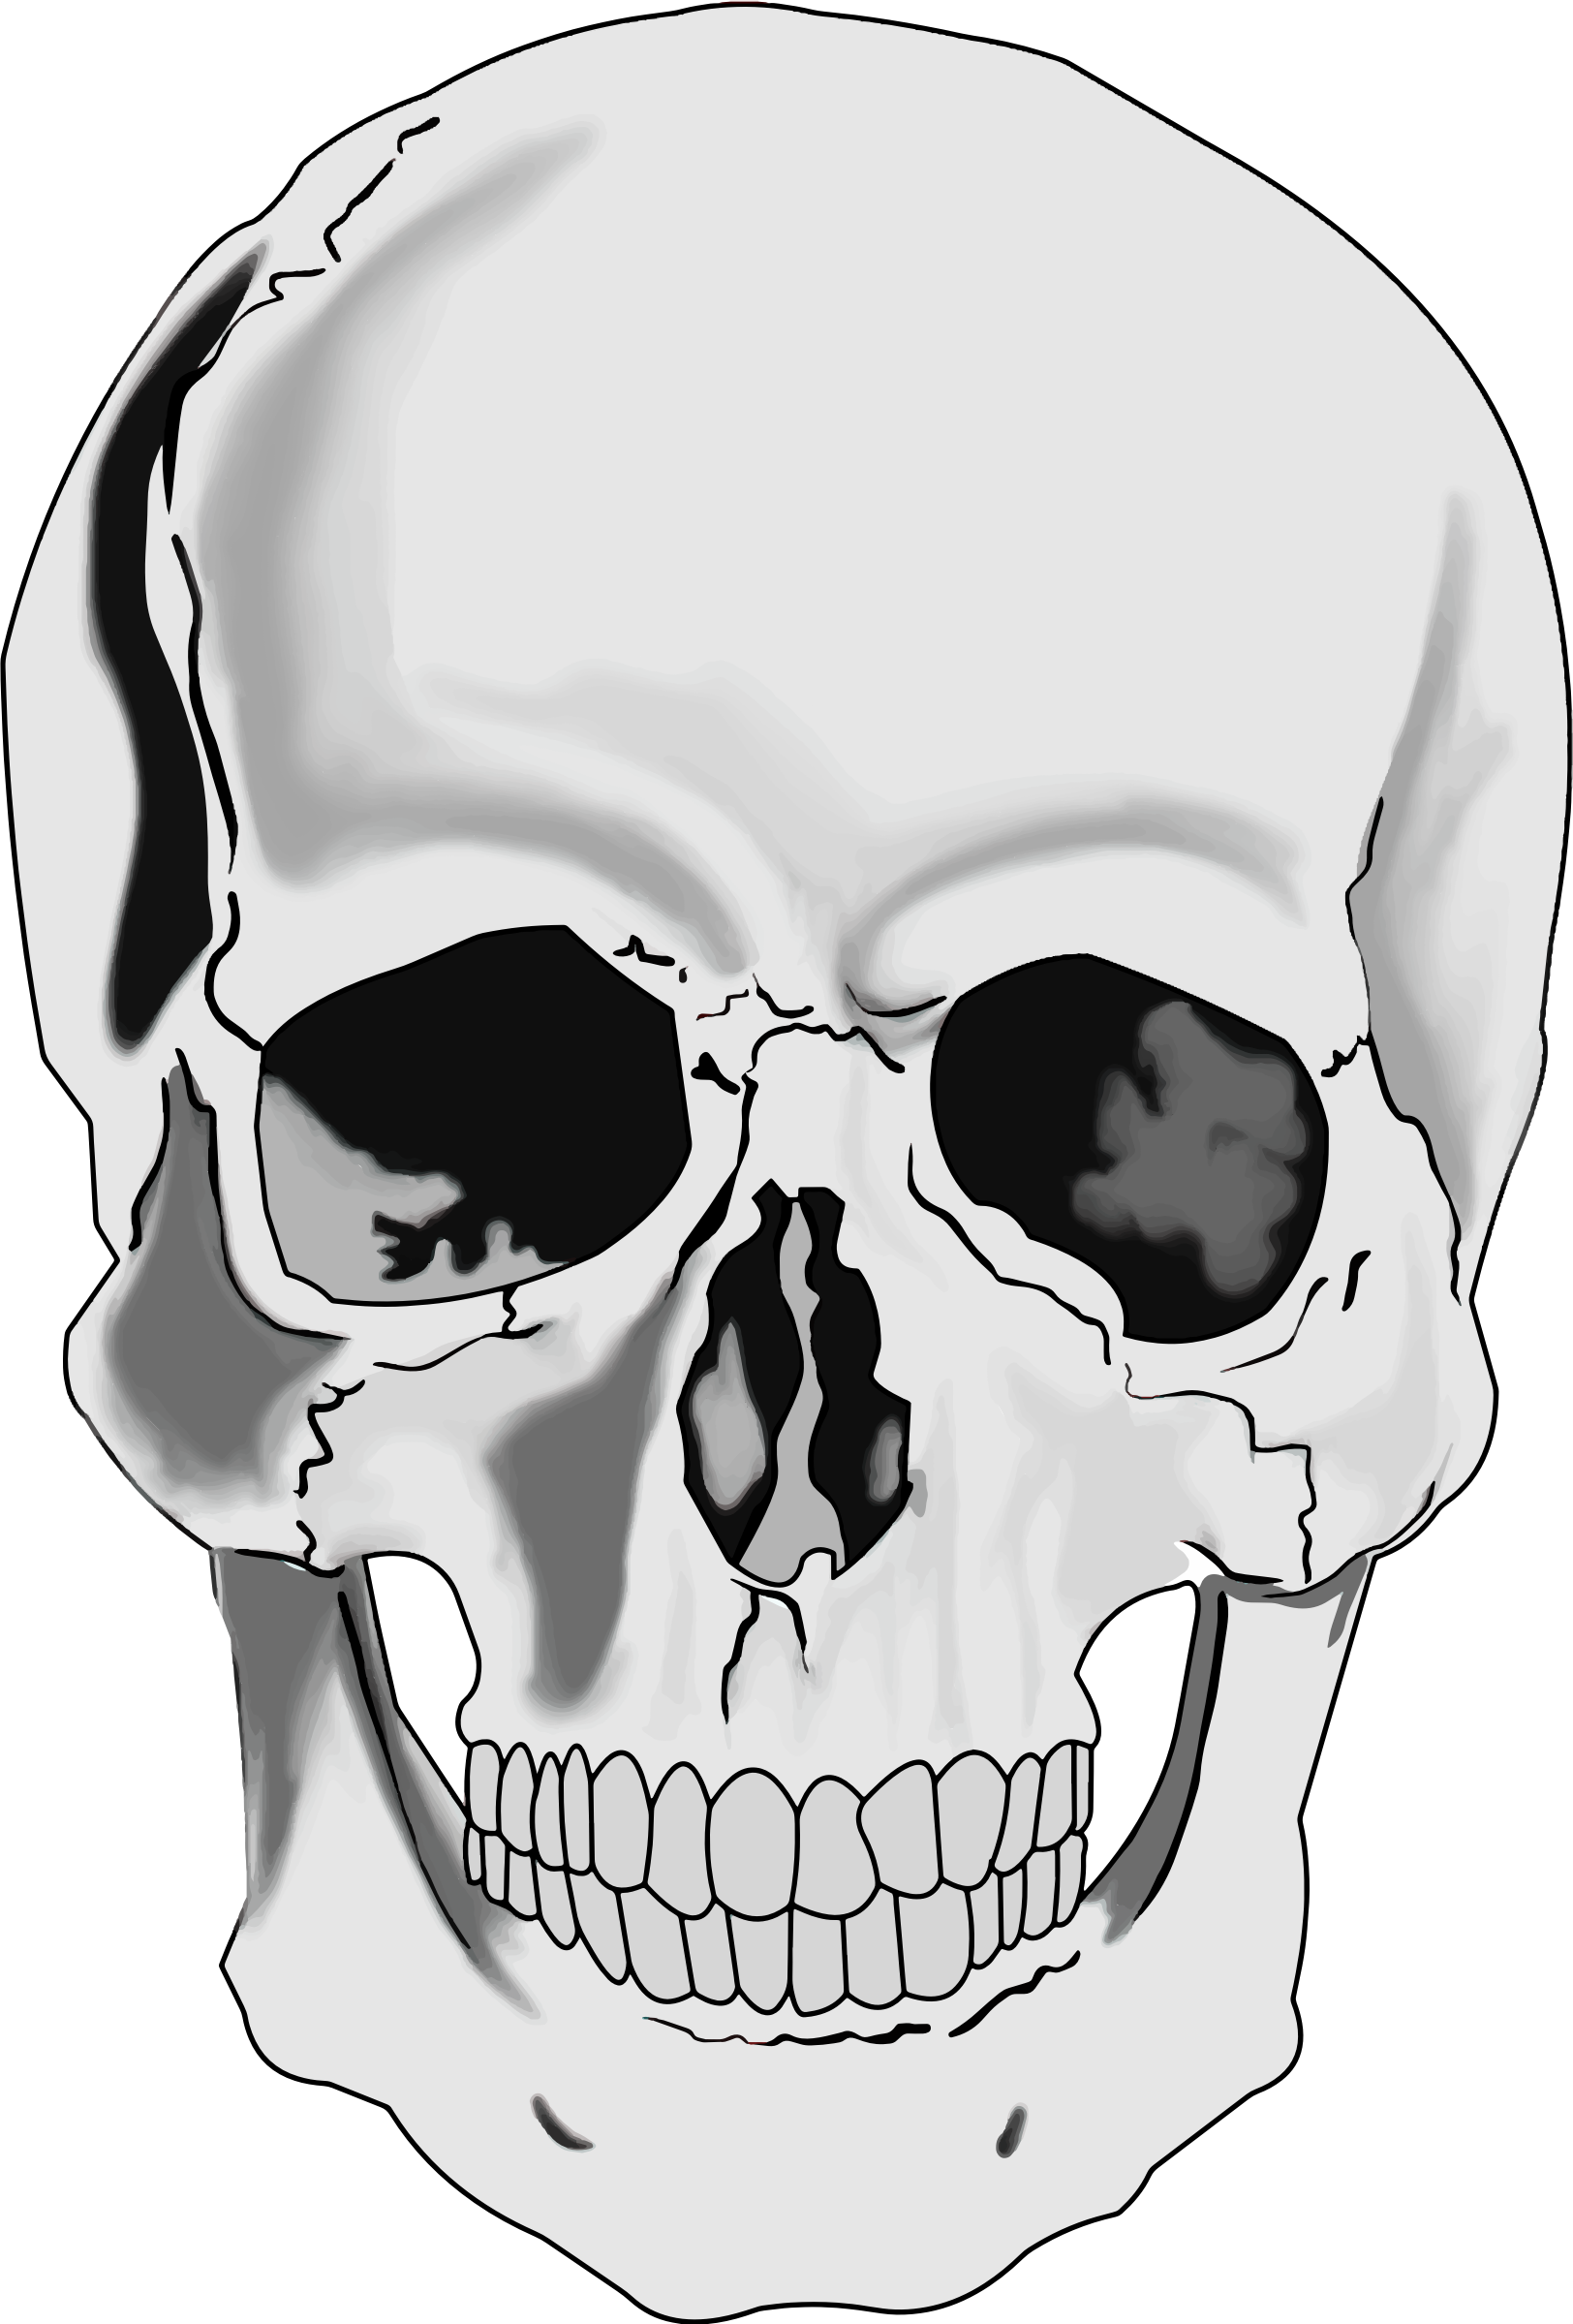 Free Black And White Skull Drawings Download Free Clip Art Free Clip Art On Clipart Library